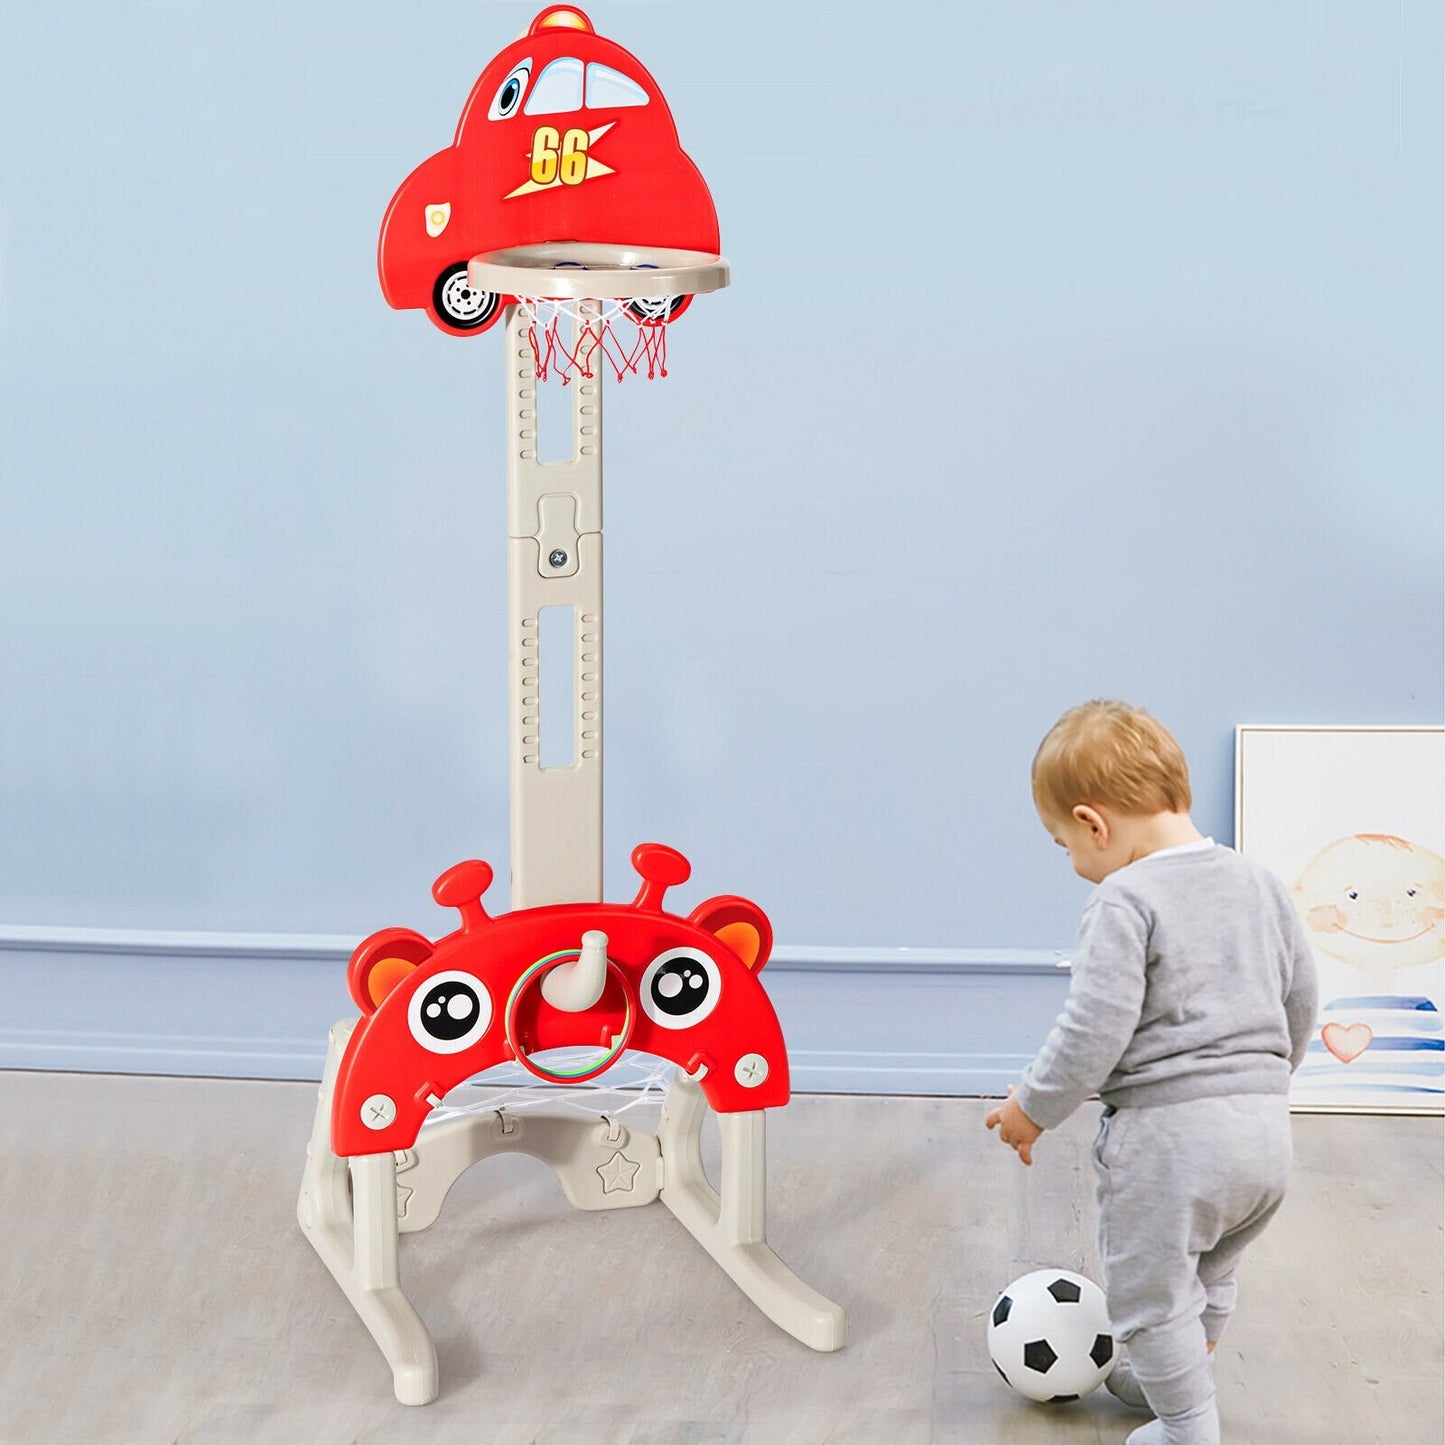 3-in-1 Basketball Hoop for Kids Adjustable Height Playset with Balls, Red